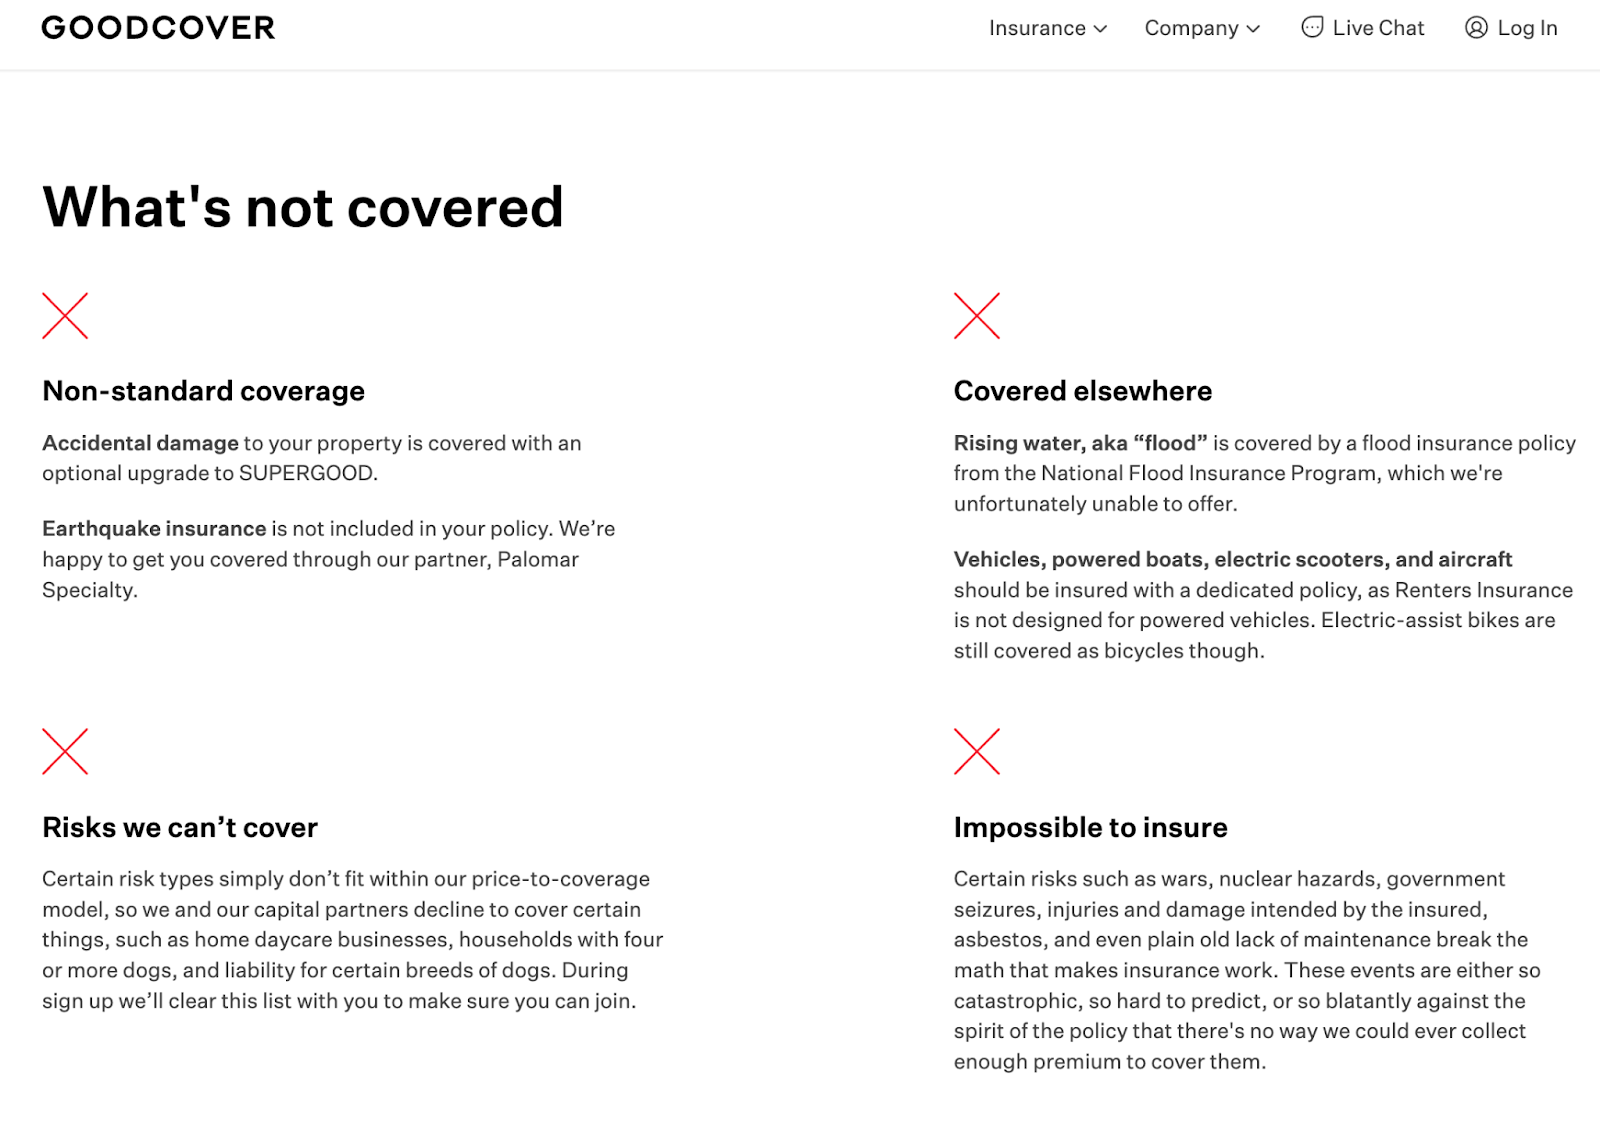 Goodcover’s Complete Guide to Renters Insurance in Columbus, Ohio